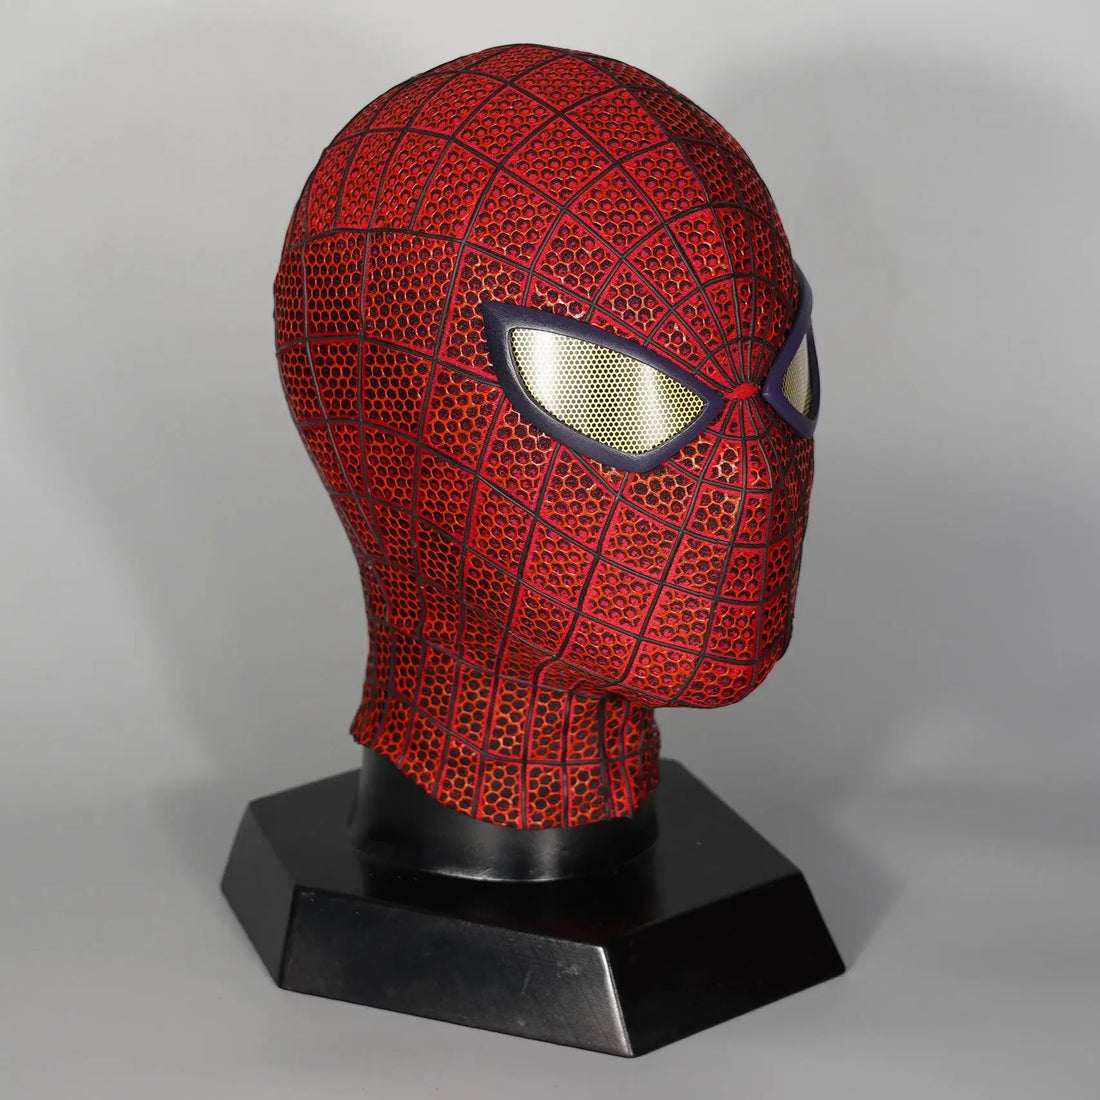 Marvel The Amazing Spider-Man Mask with Faceshell, 1:1 3D Handmade Spiderman Mask for Man Halloween Cosplay Birthday Xmas Gift